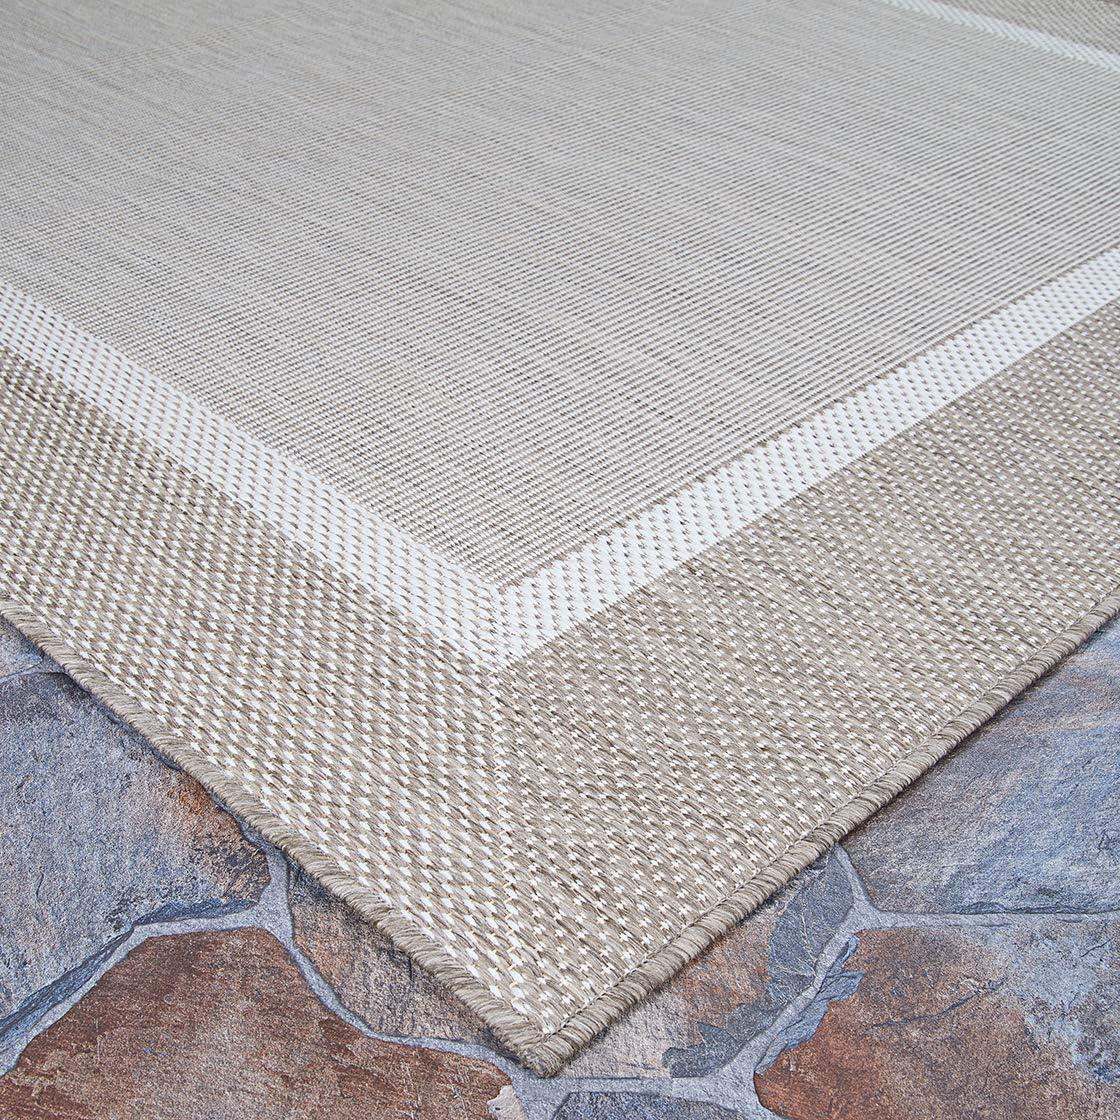 Champagne-Taupe Synthetic Rectangular 9' x 13' Easy-Care Outdoor Rug